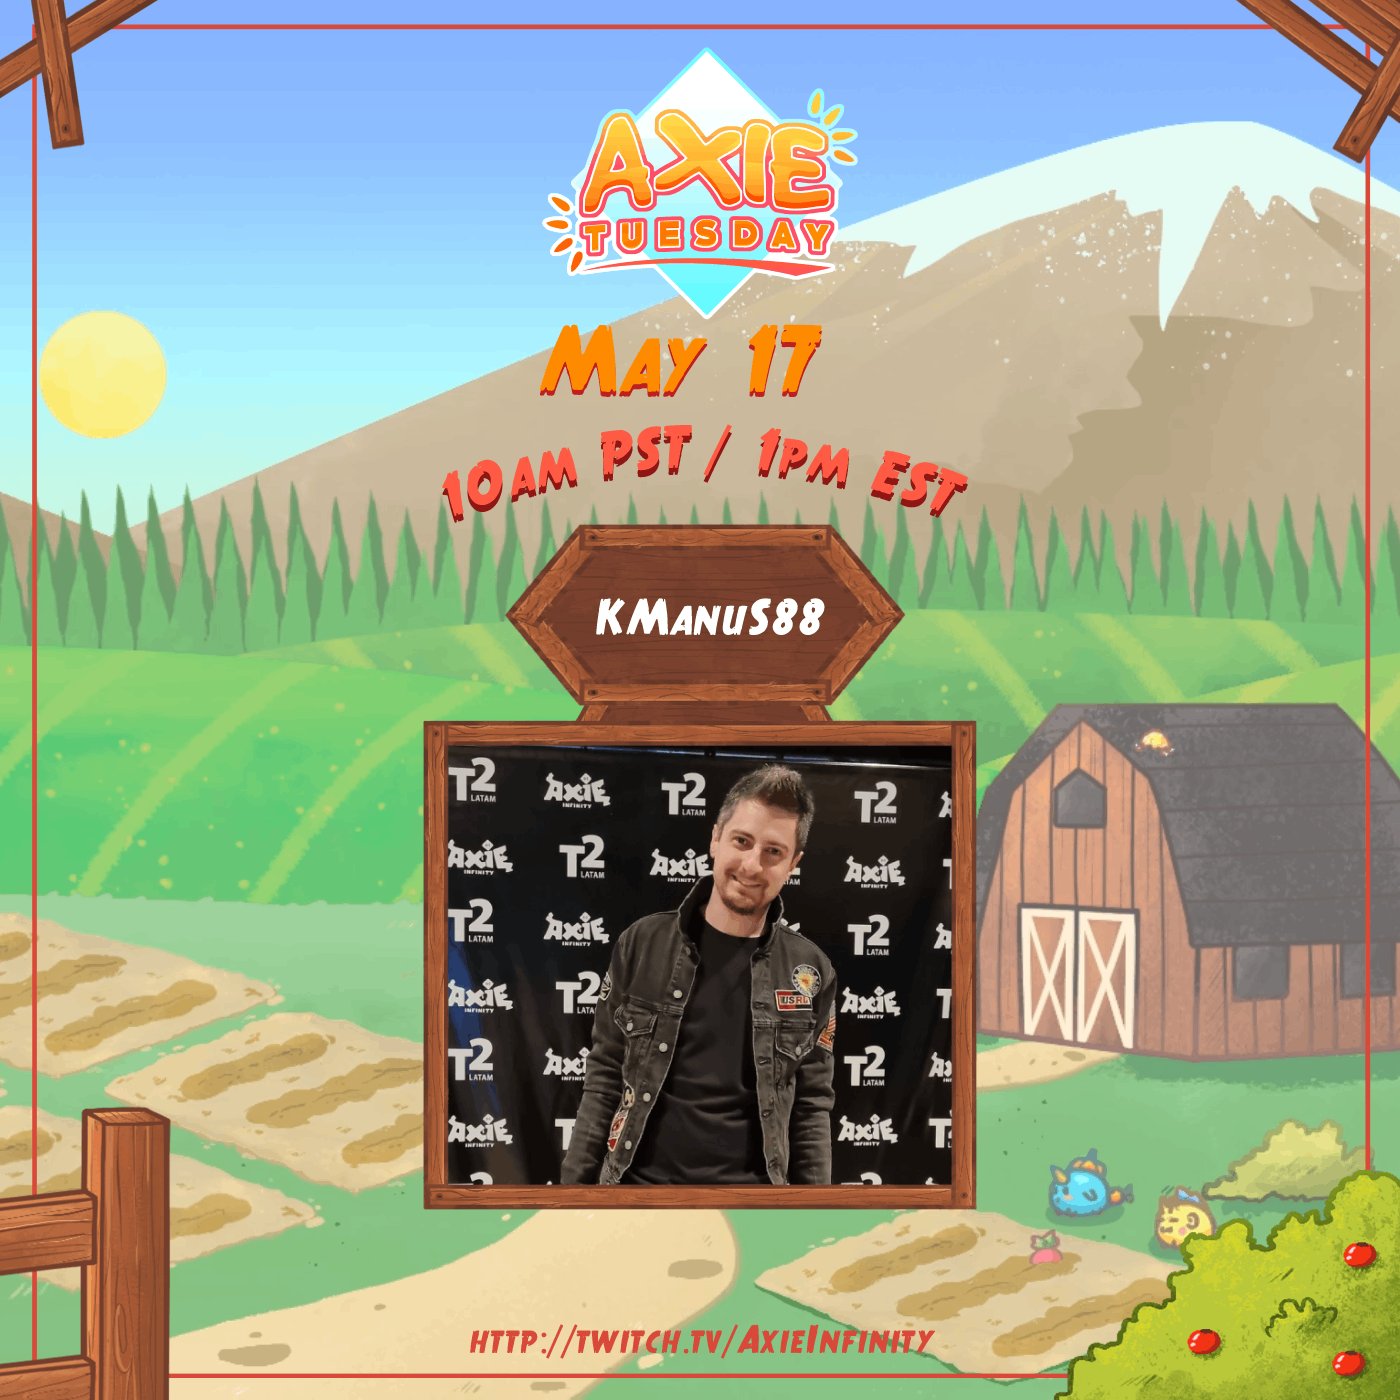 In about 6 hours we will be streaming Axie Tuesday with @KmanuS88  He will join @ZyoriTV for a thoughtful, back and forth discussion about Axie Esports, sustainable economy ideas, and dreaming about Land gameplay!  It will be live on: [twitch.tv] [twitter.com] [pbs.twimg.com]